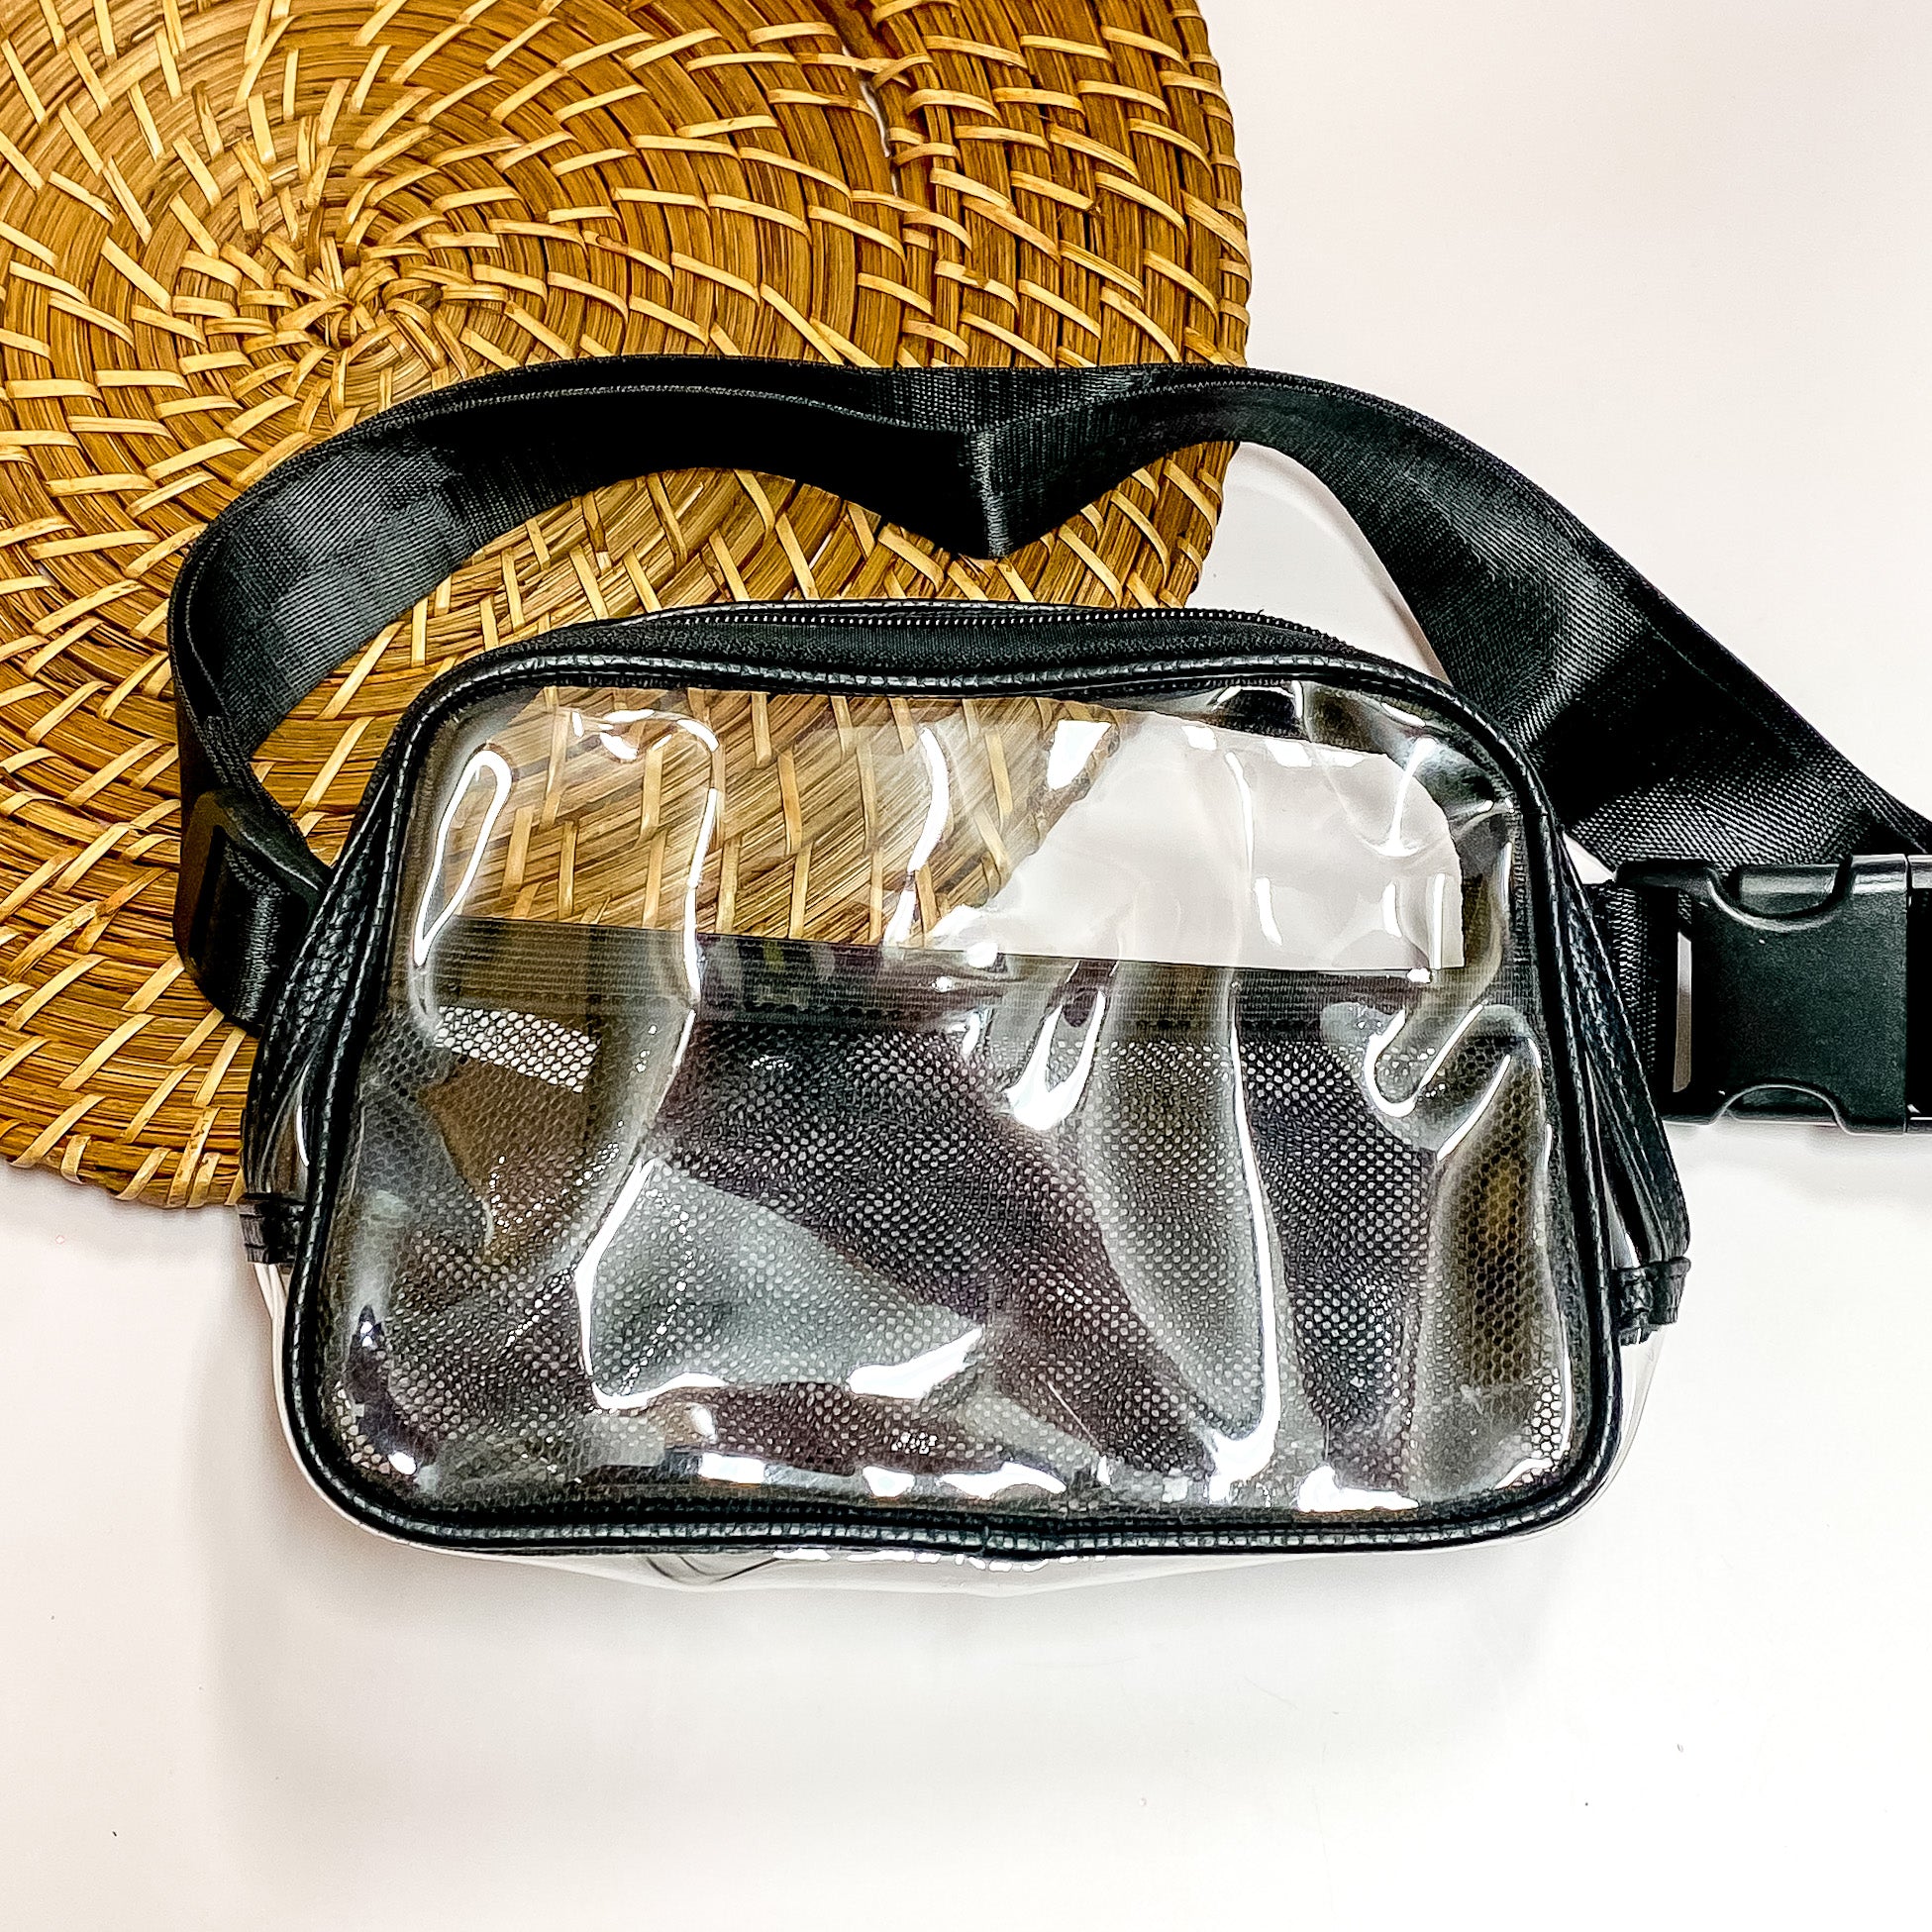 Pictured is a rectangle clear fanny pack with a black outline. This bag also includes a black strap, black accents, and black mesh pockets. This bag is pictured on a white and brown patterned background. 